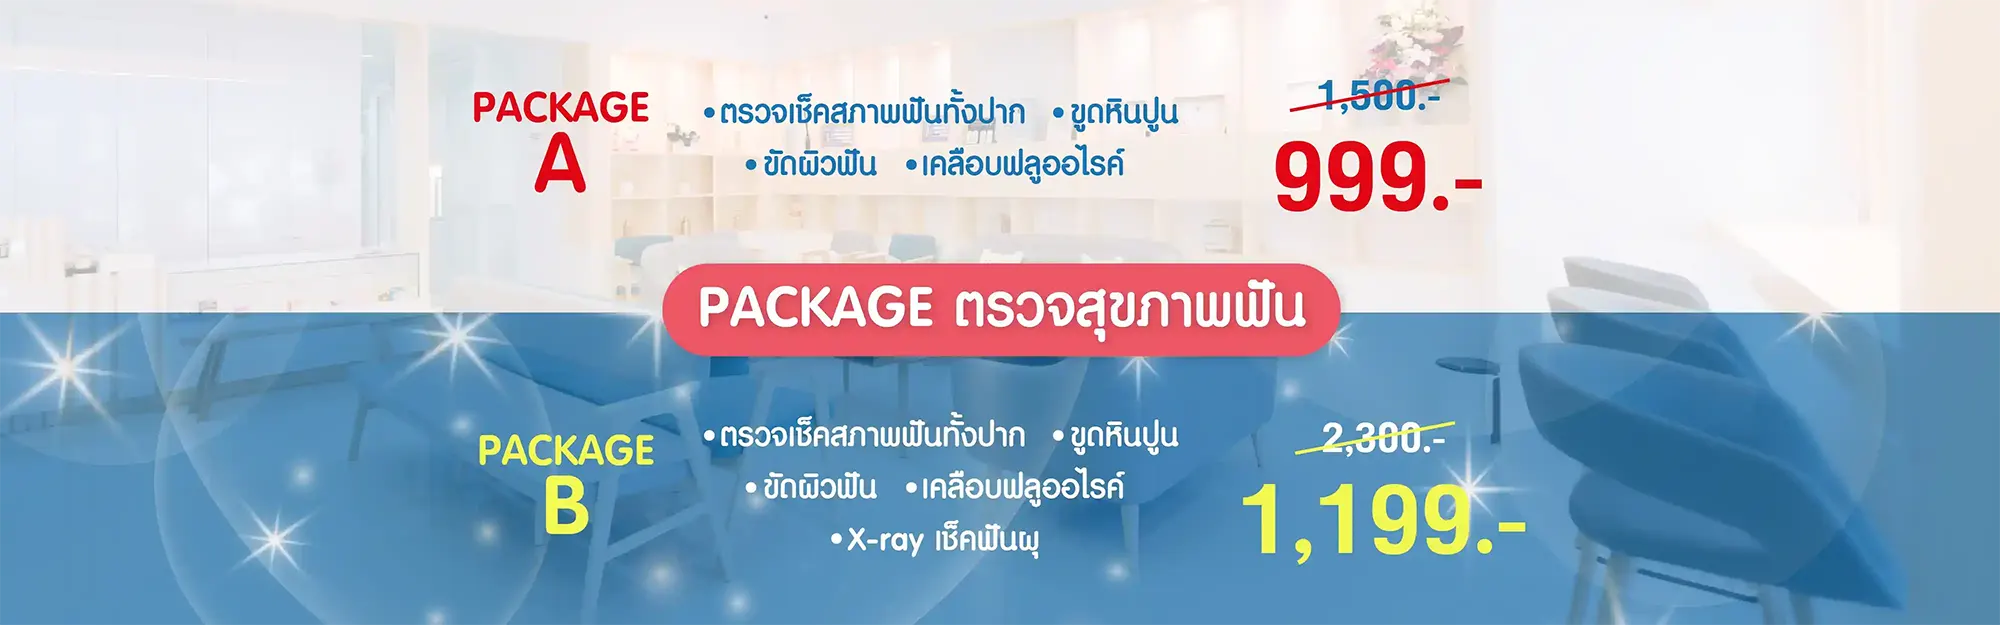 main-package-01-1